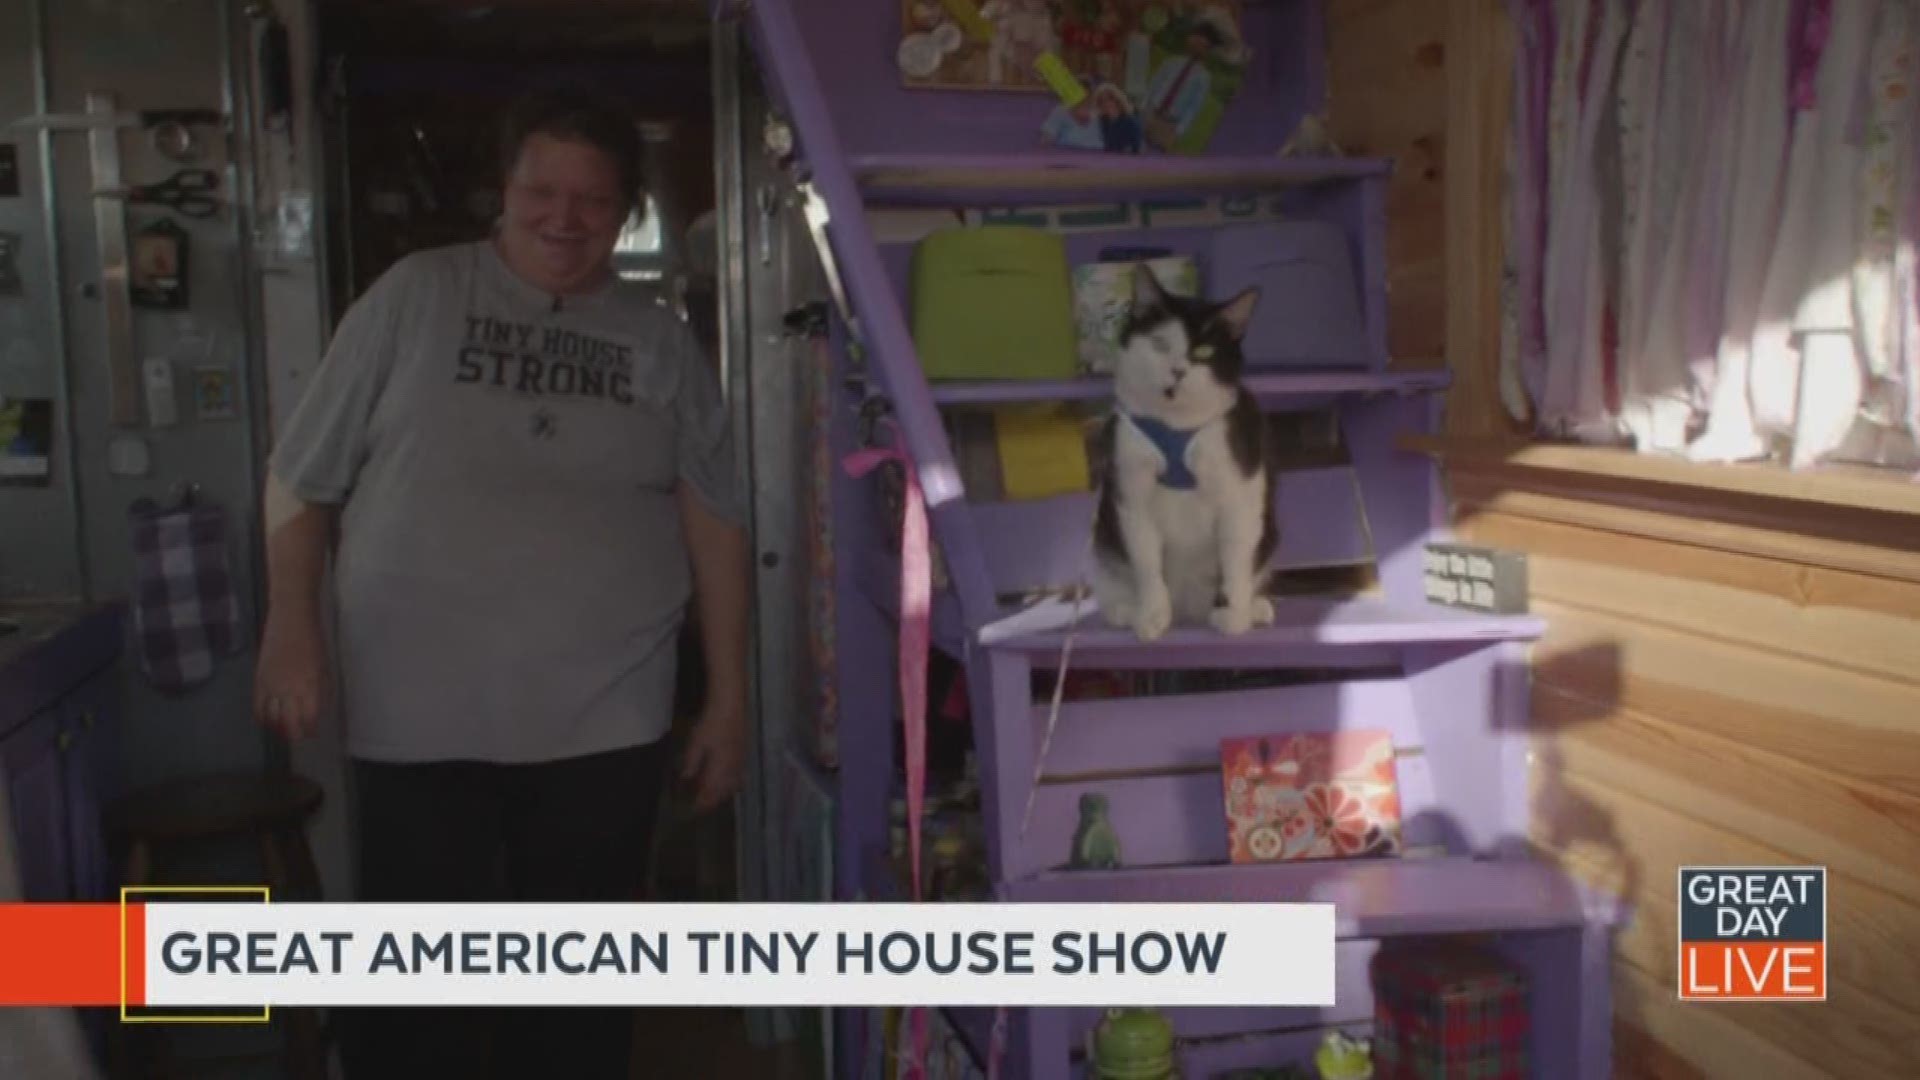 Great American Tiny House Show will feature Tiny Homes, Container Homes, Modular Homes, and Portable Structures.